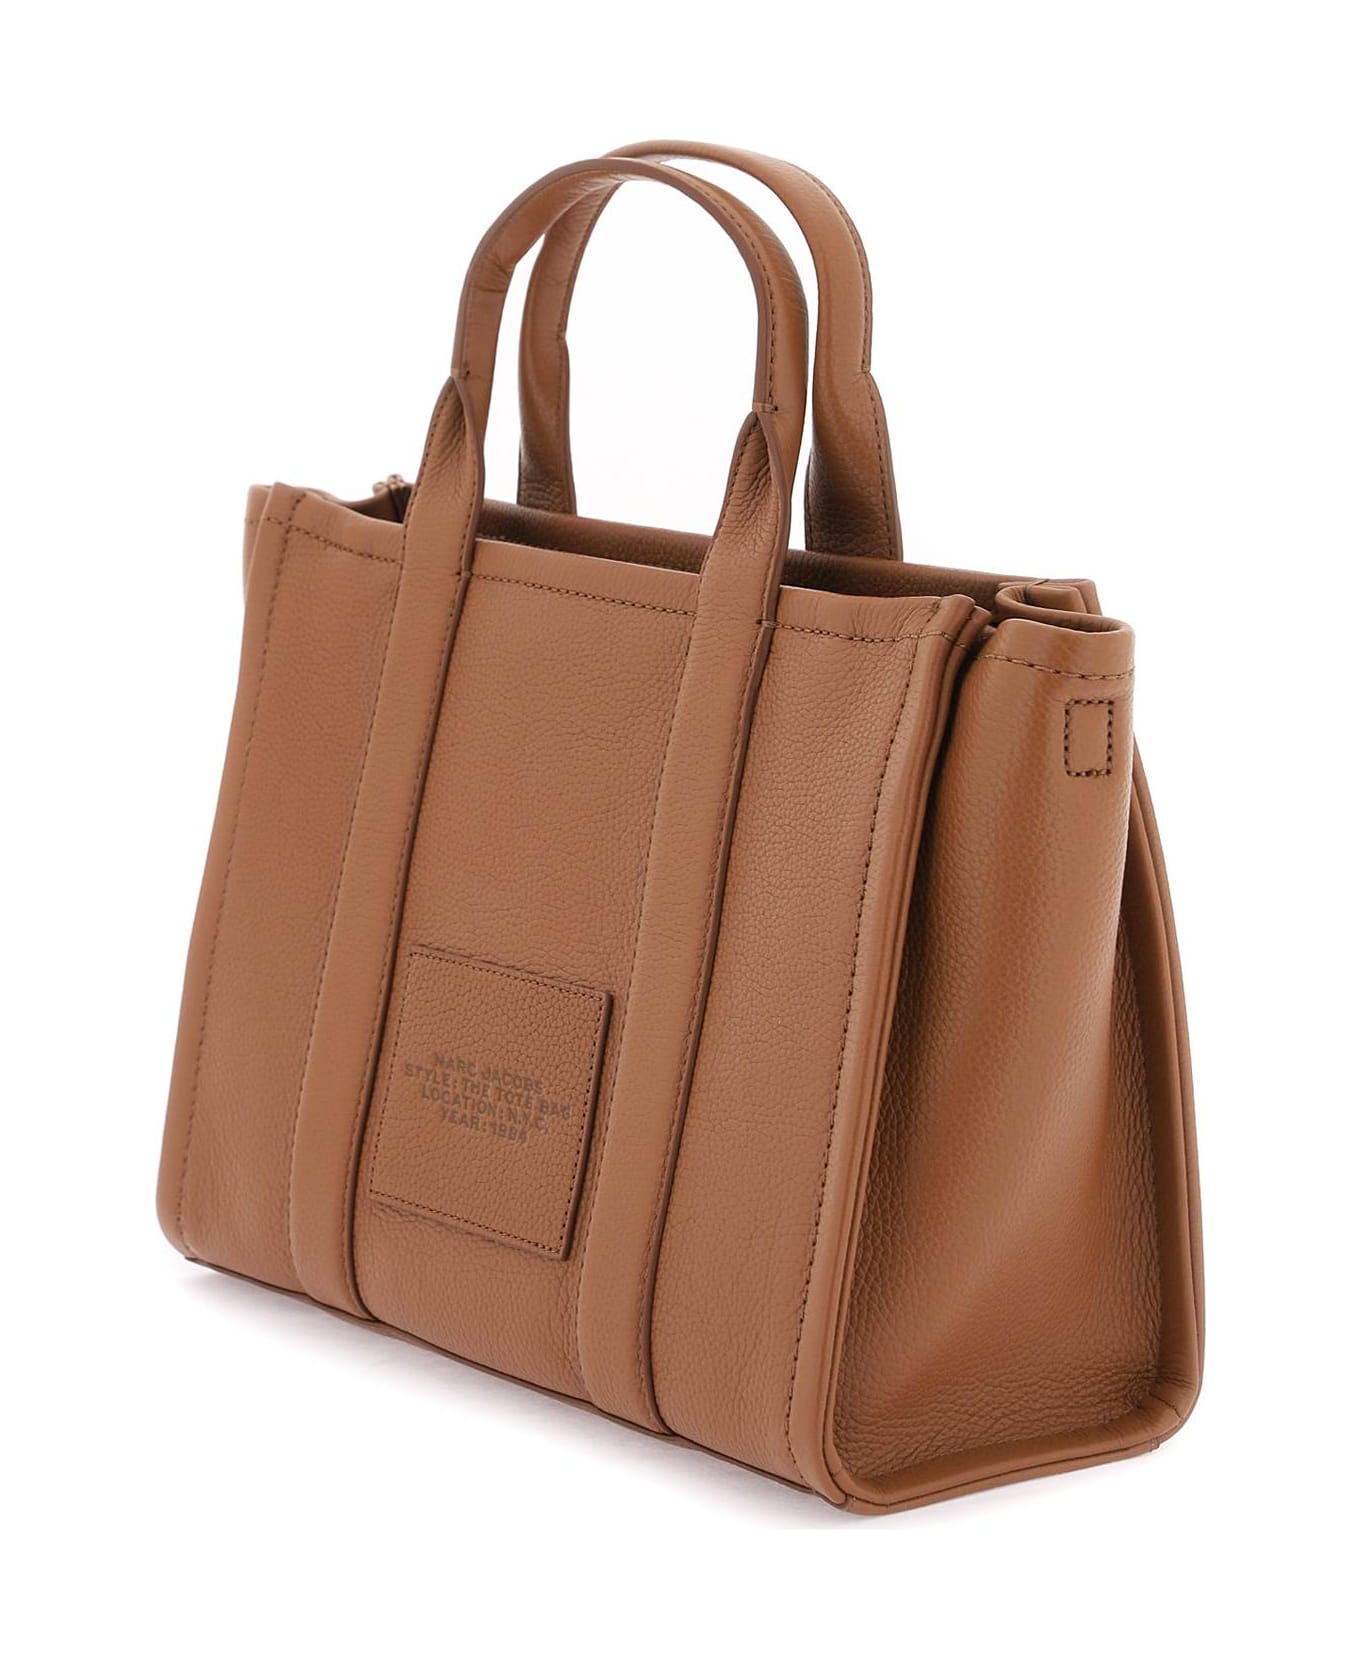 Marc Jacobs Brown Leather Small The Tote Bag - Brown